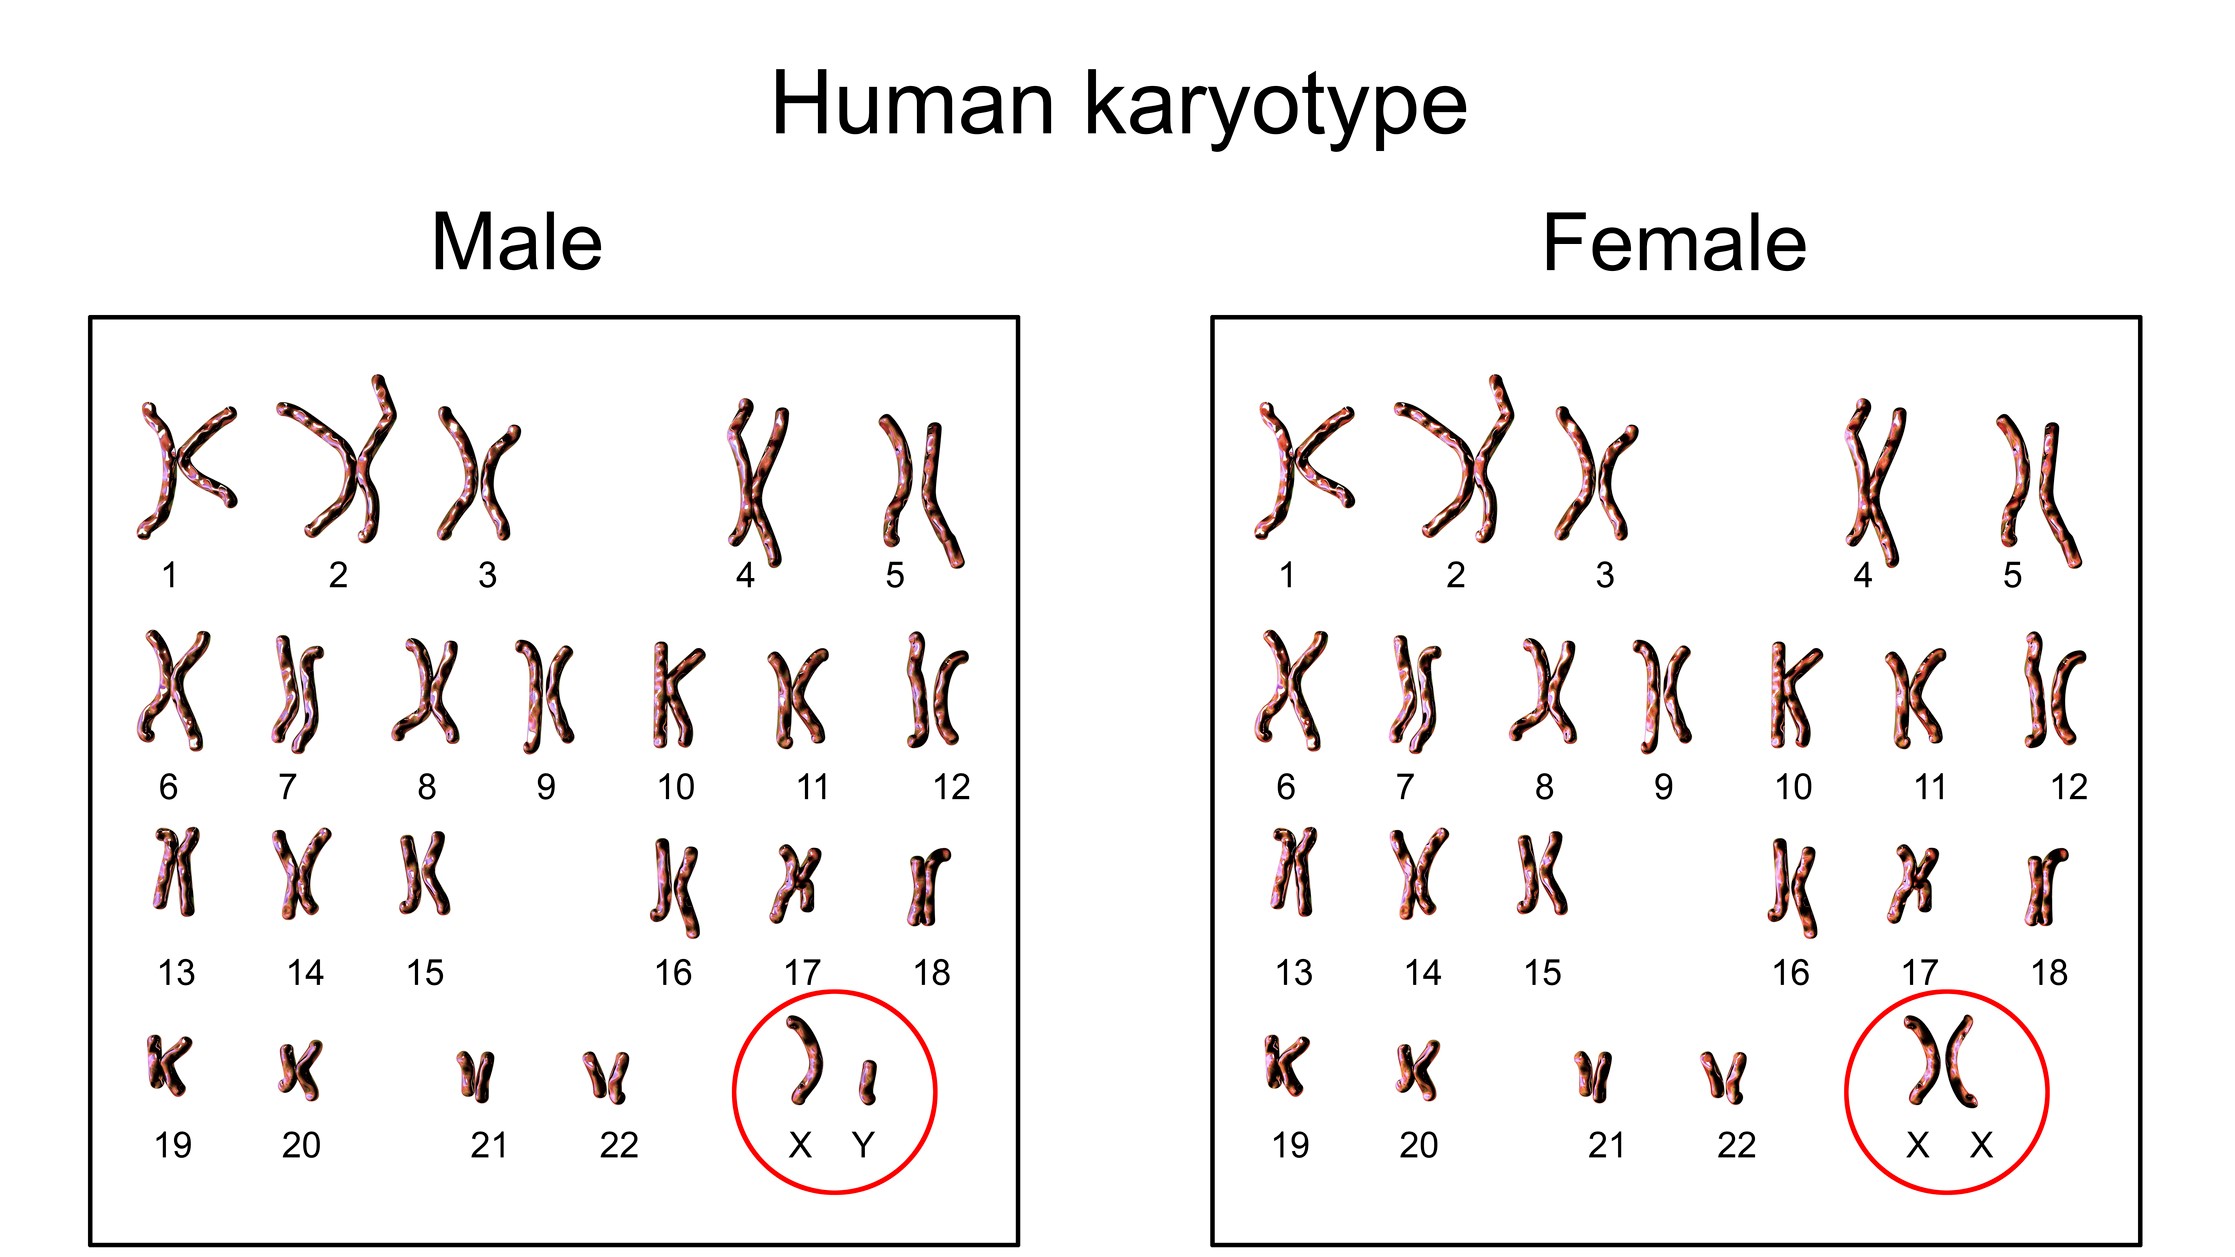 Humans have 23 pairs of chromosomes.